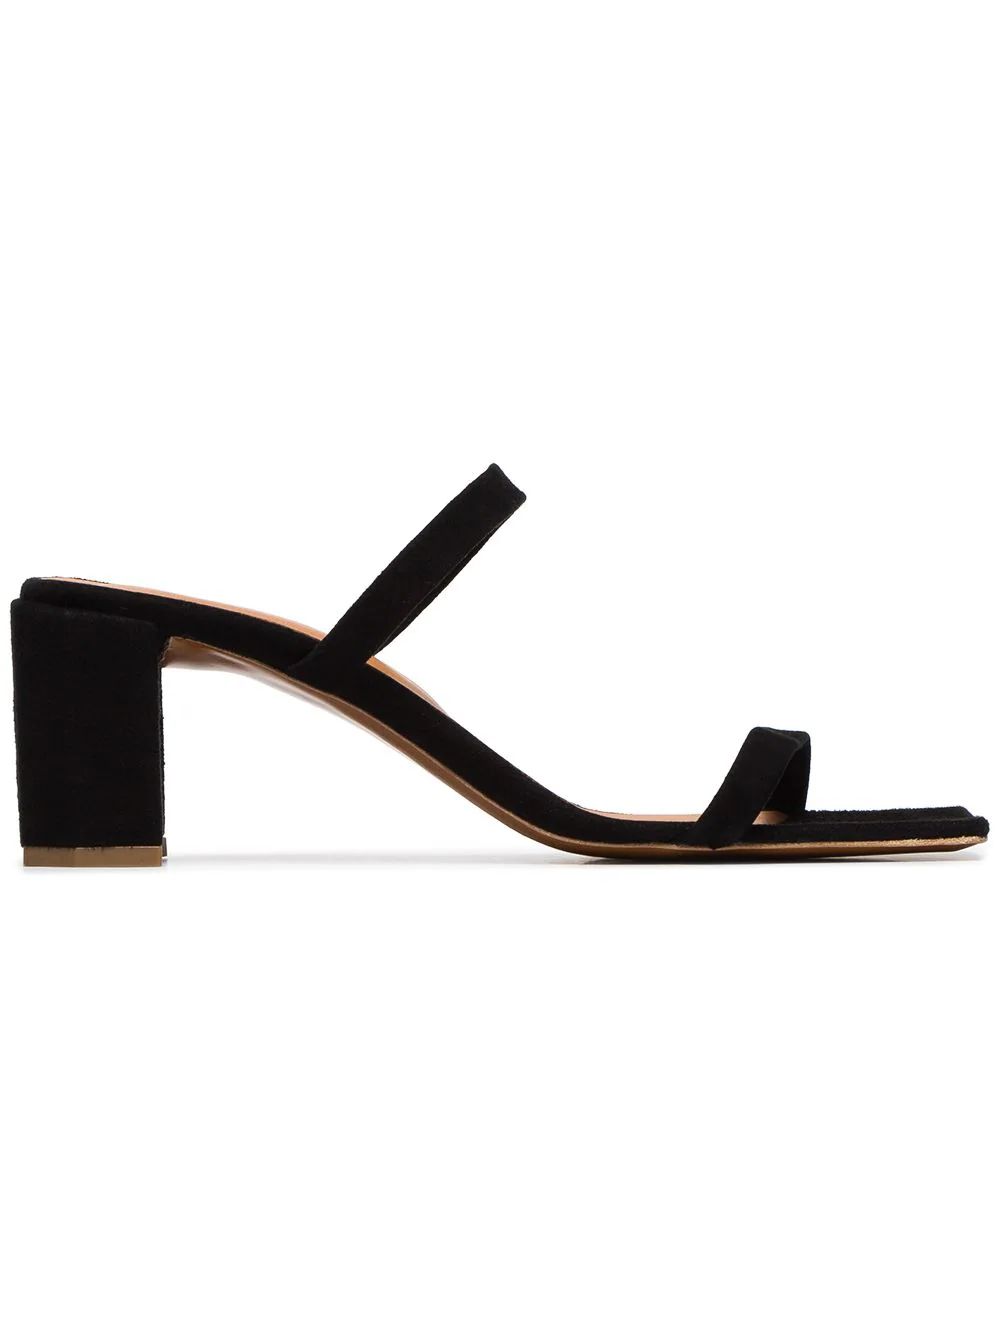 BY FAR black Tanya 65 double strap suede mules | FarFetch Global